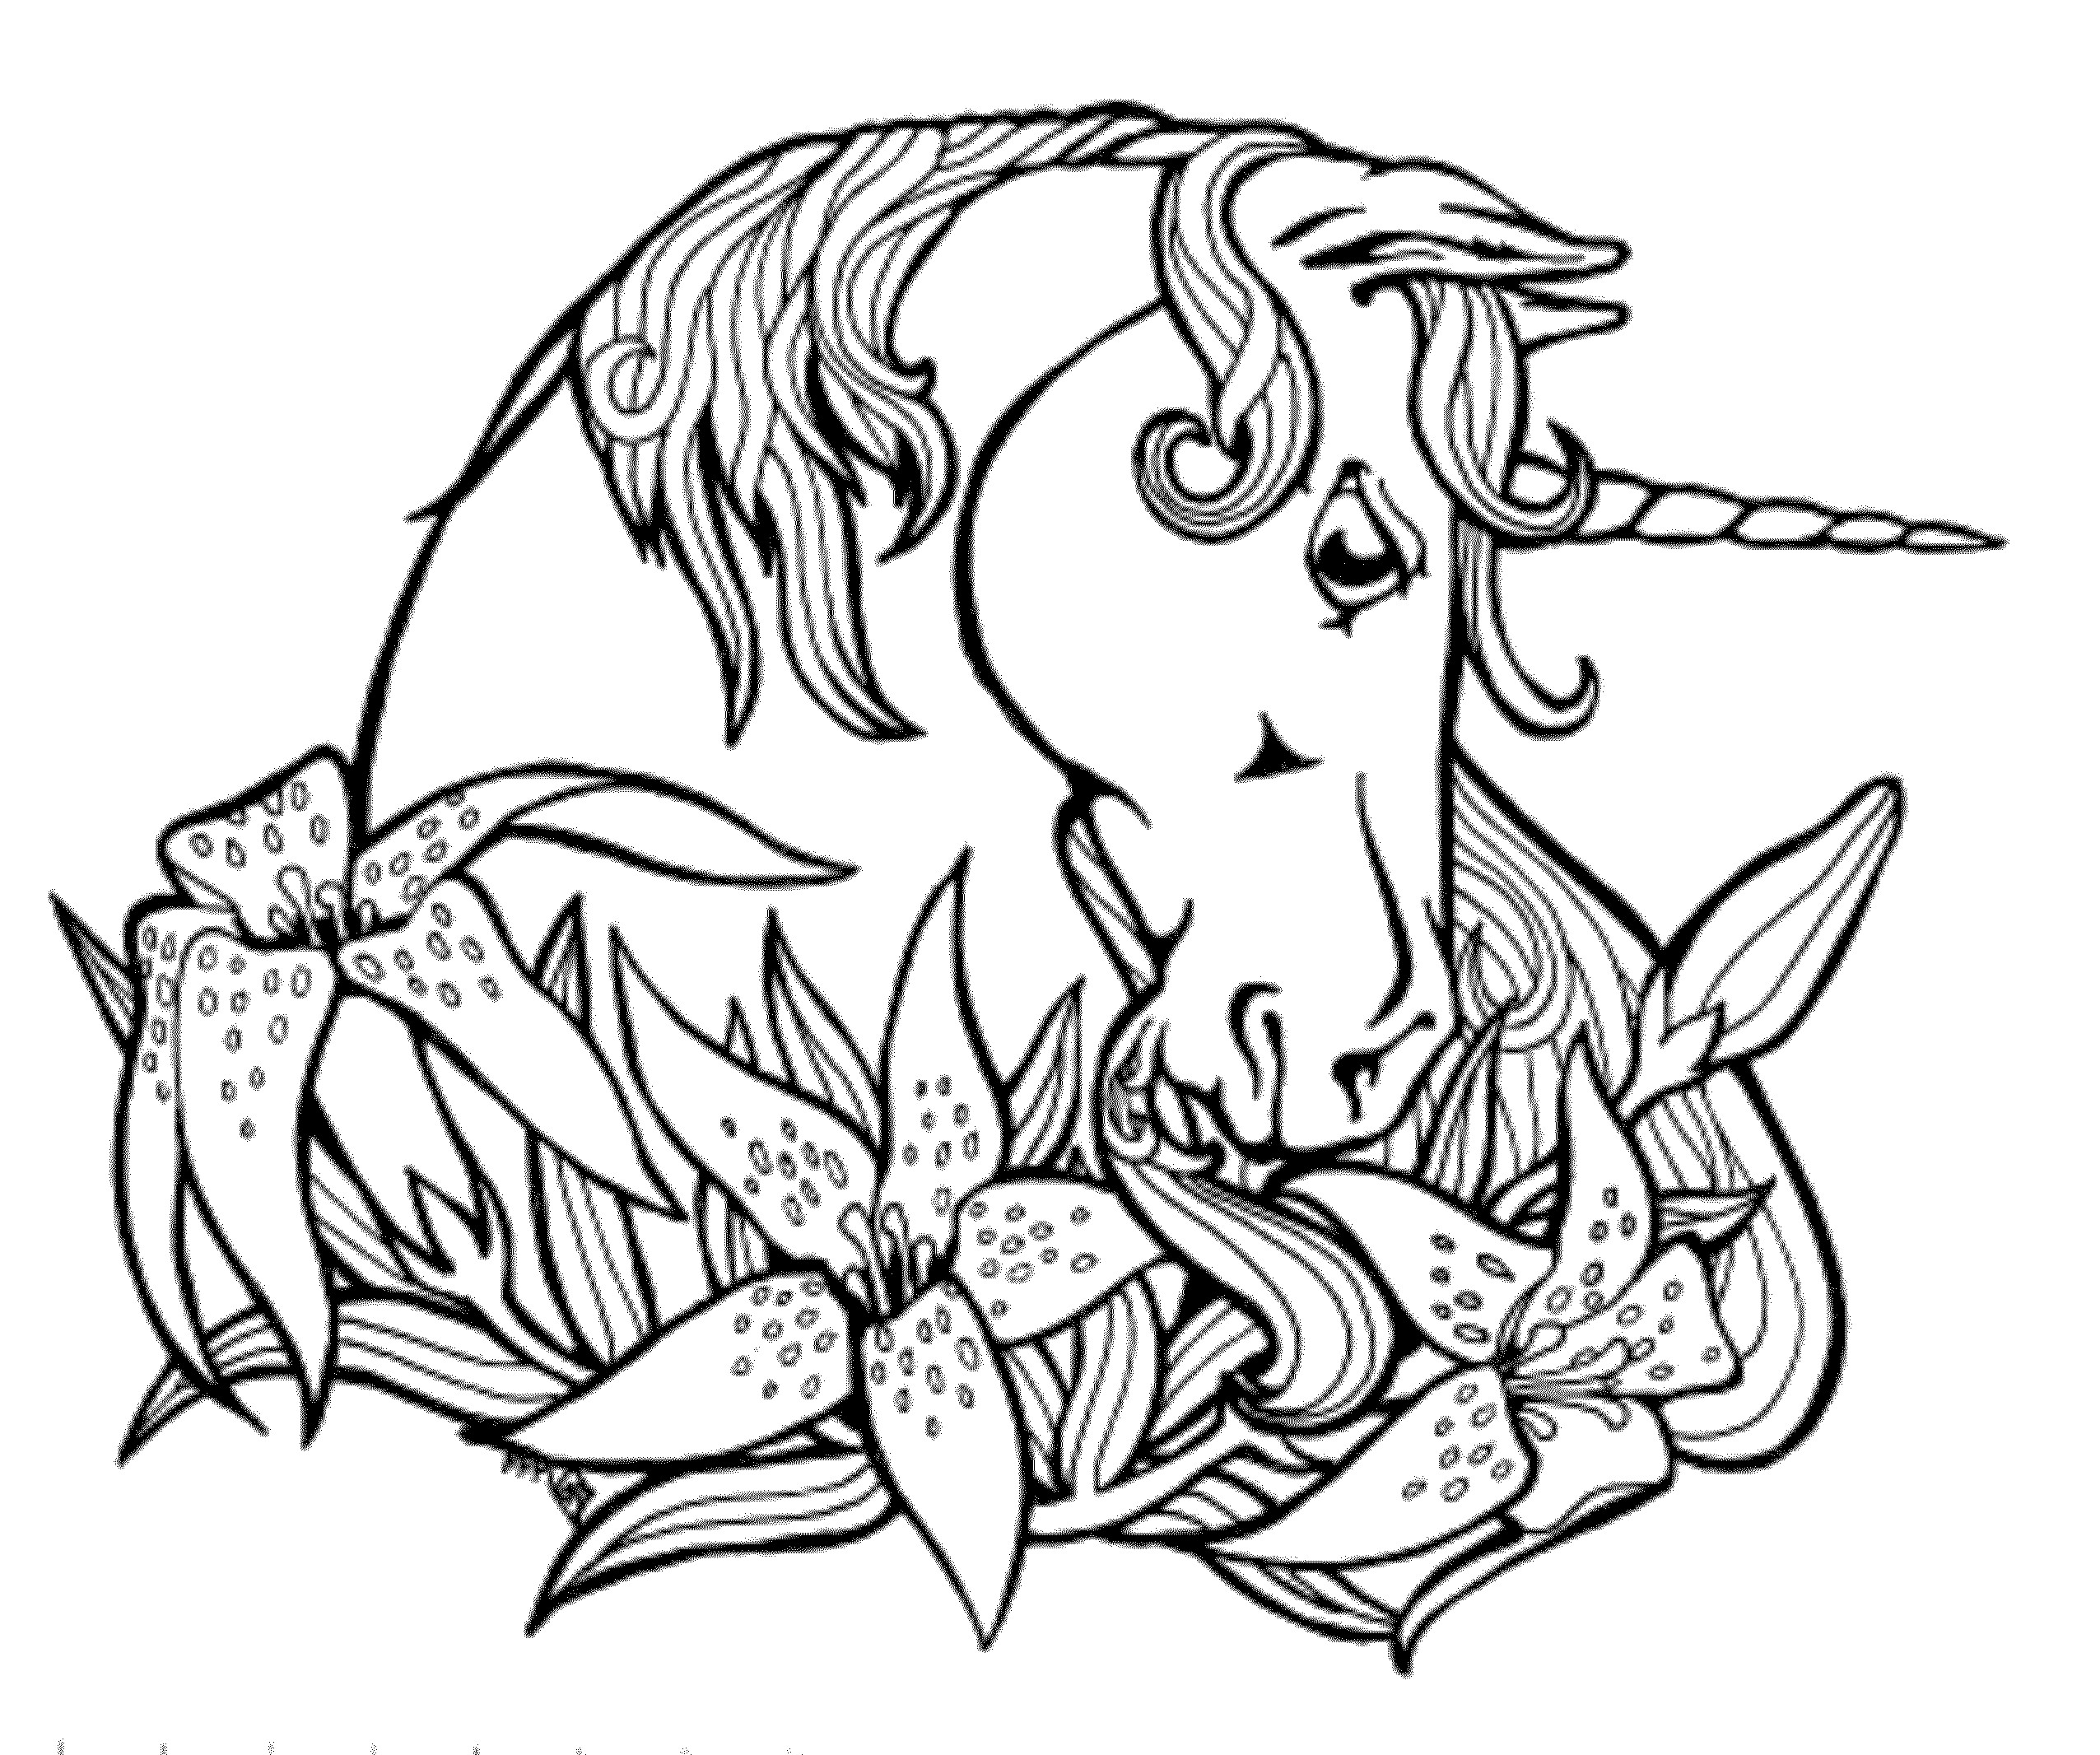 Unicorn Girl Coloring Pages
 Print & Download Unicorn Coloring Pages for Children